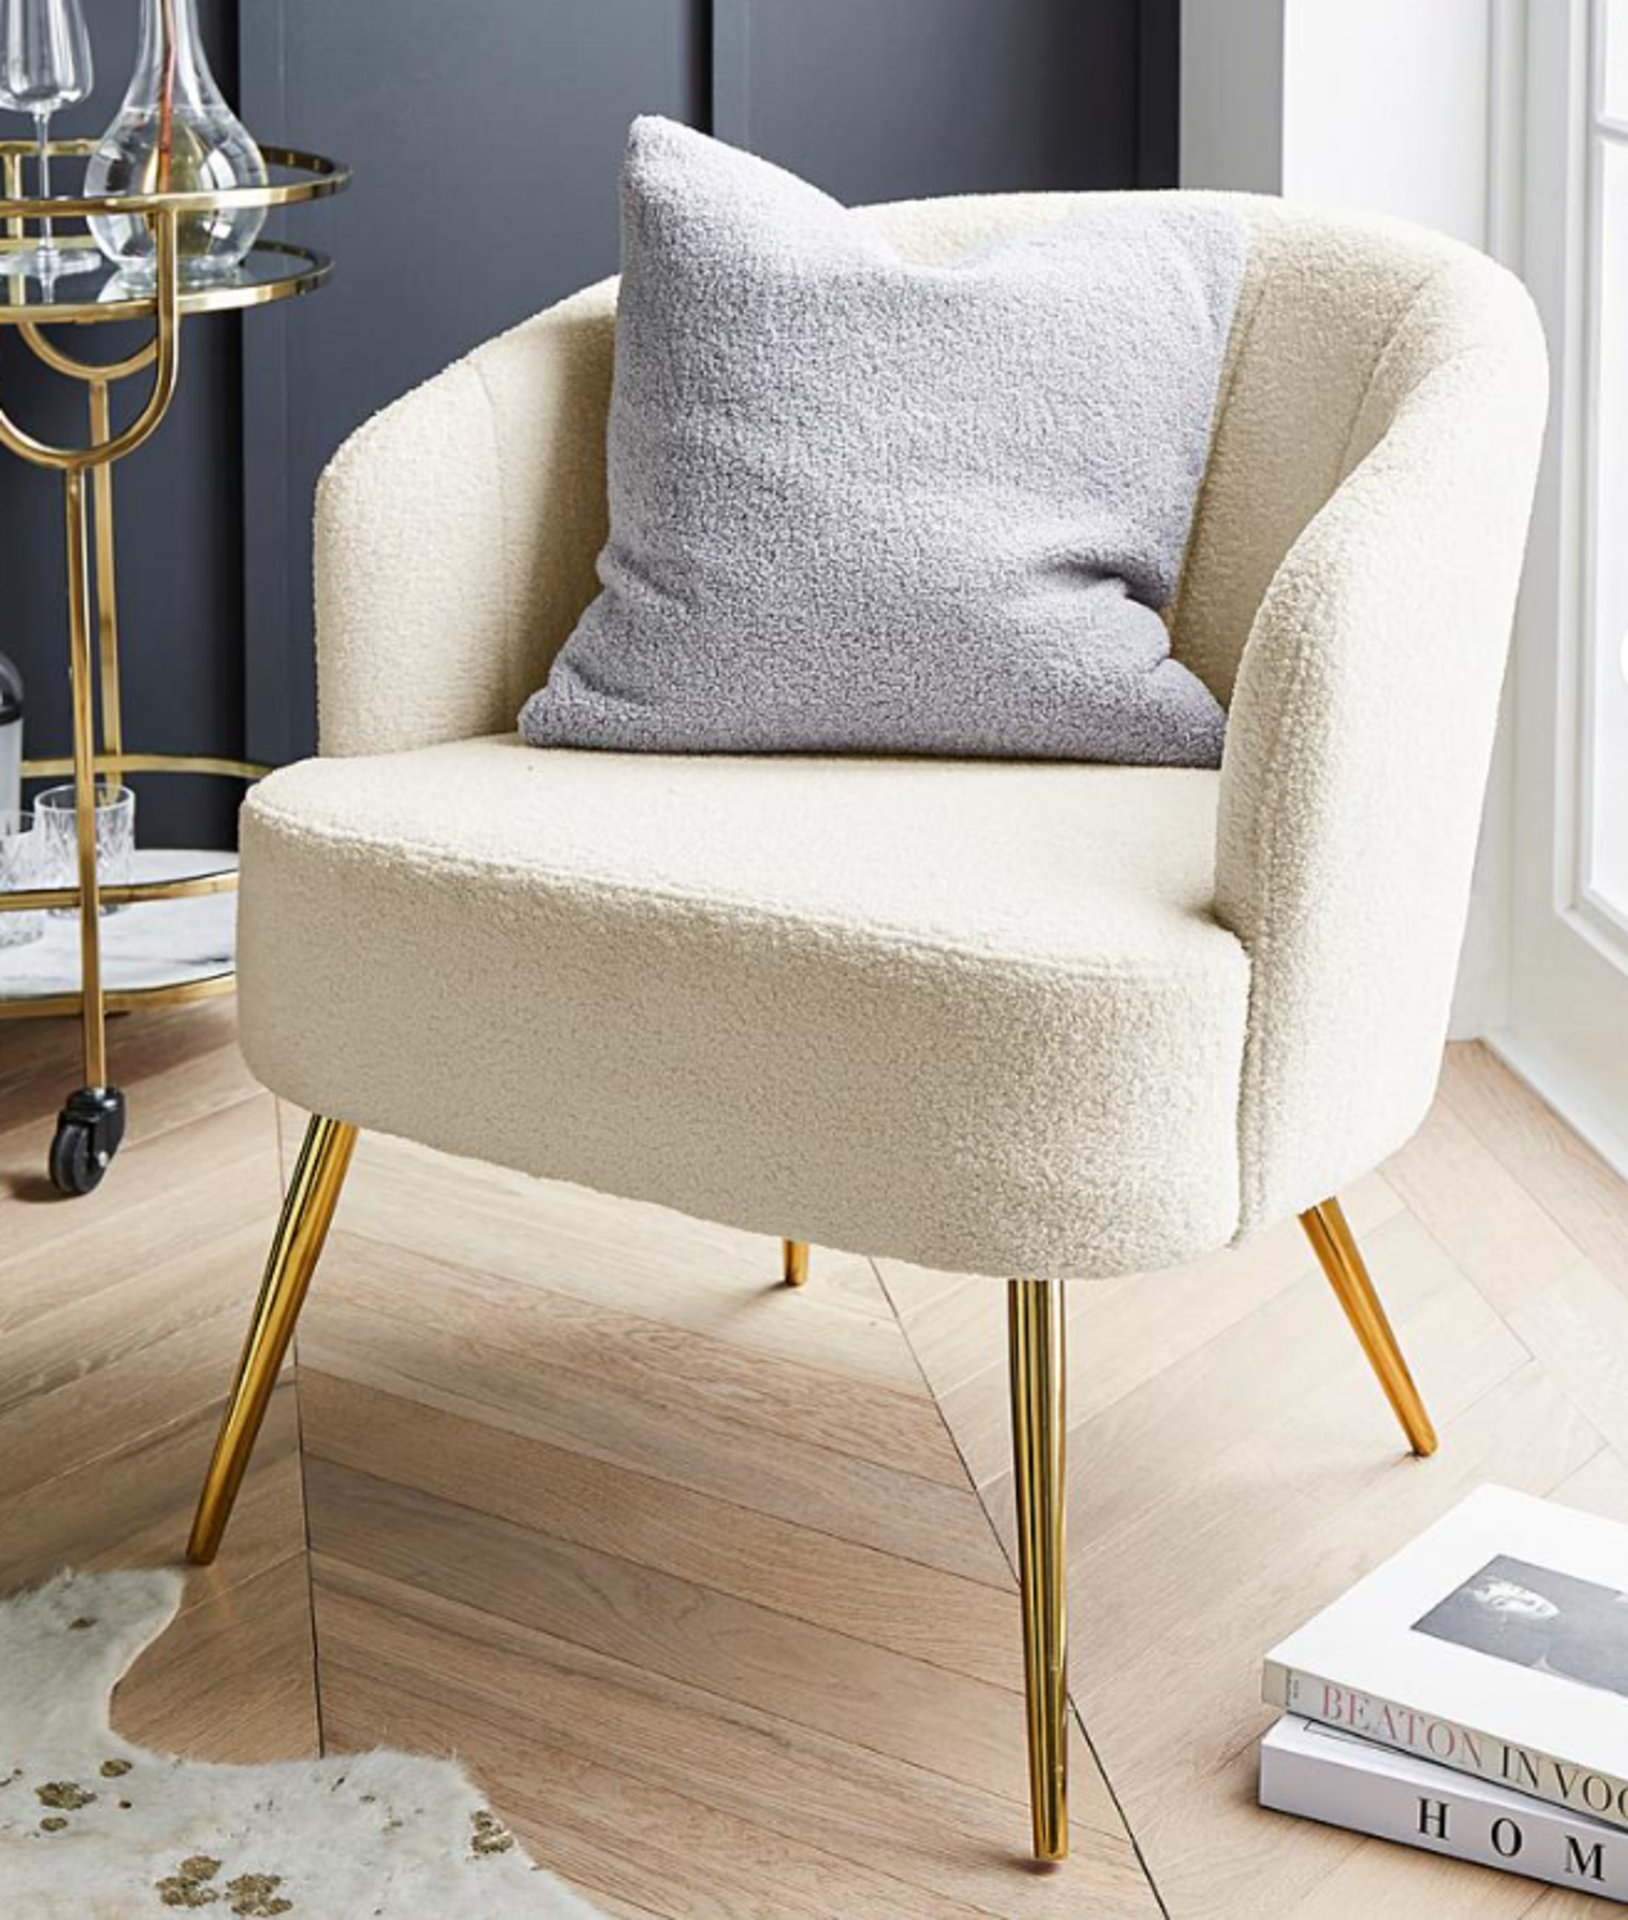 Esme Teddy Accent Chair. - ER28. RRP £299.00. The Esme Teddy Accent Chair will add a touch of warmth